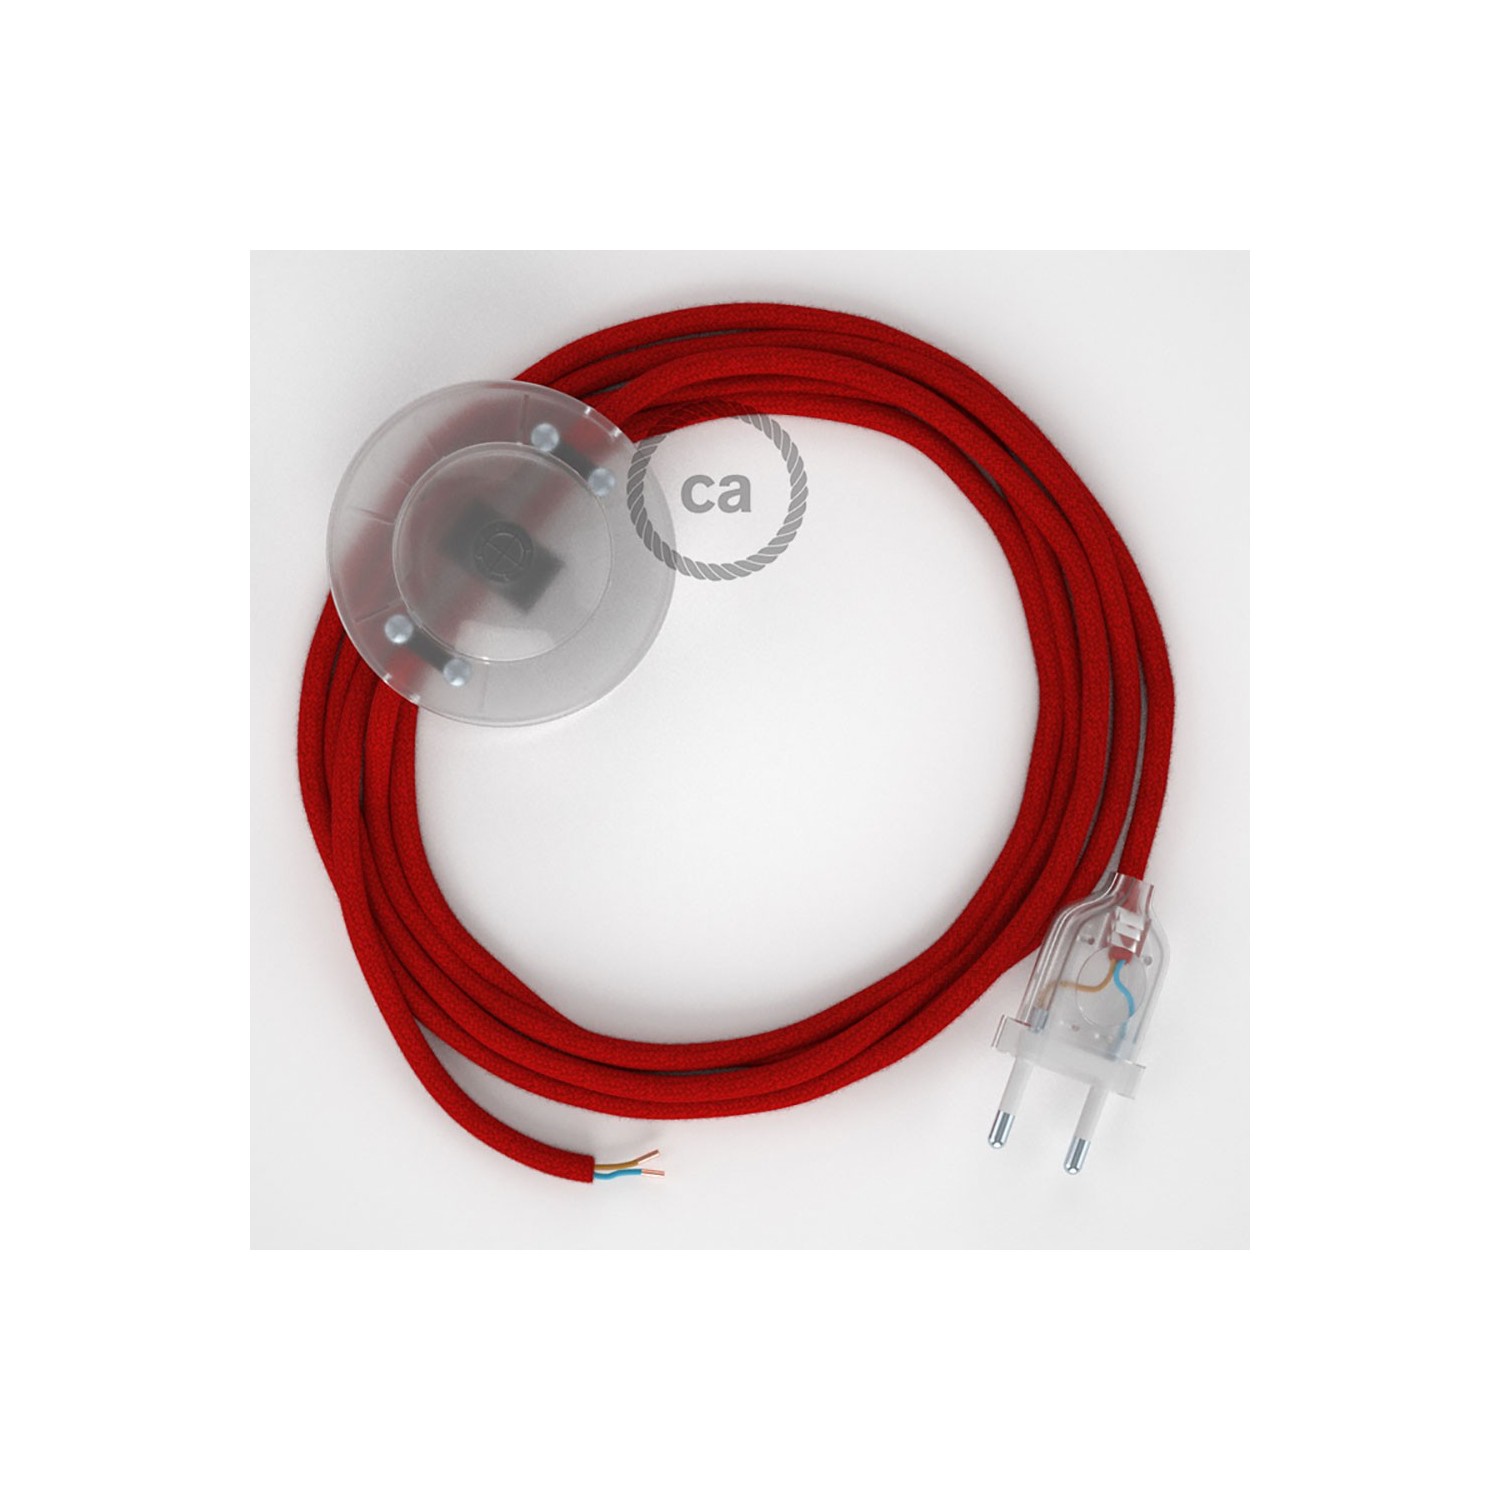 Wiring Pedestal, RC35 Fire Red Cotton 3 m. Choose the colour of the switch and plug.